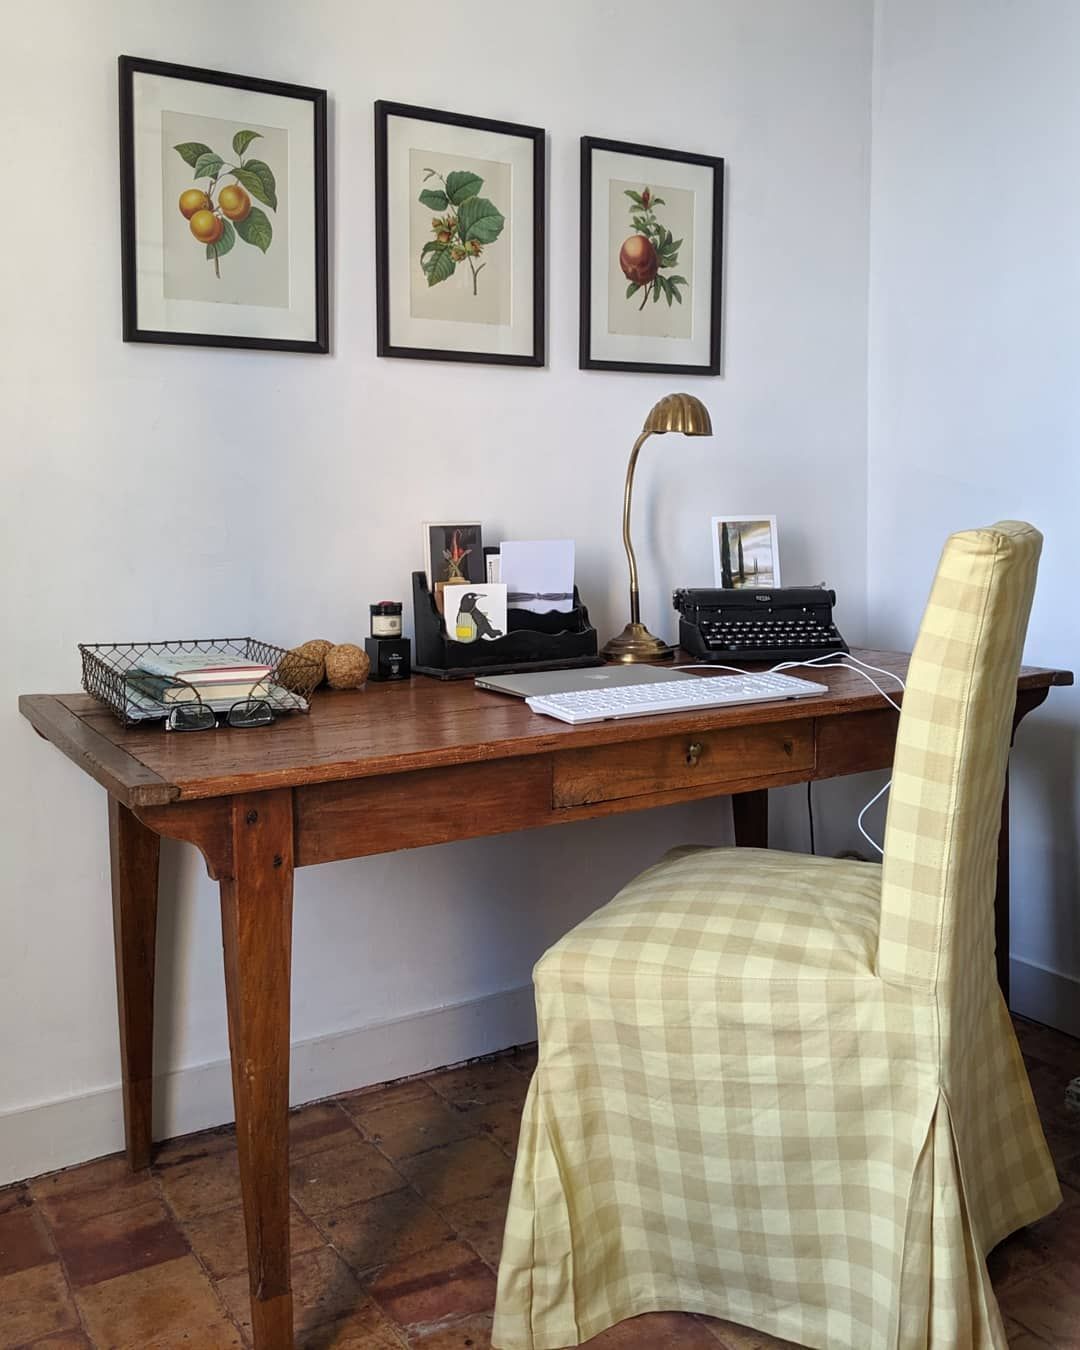 French Country Office with Gingham Slipcovered Chair via @cat_in_france